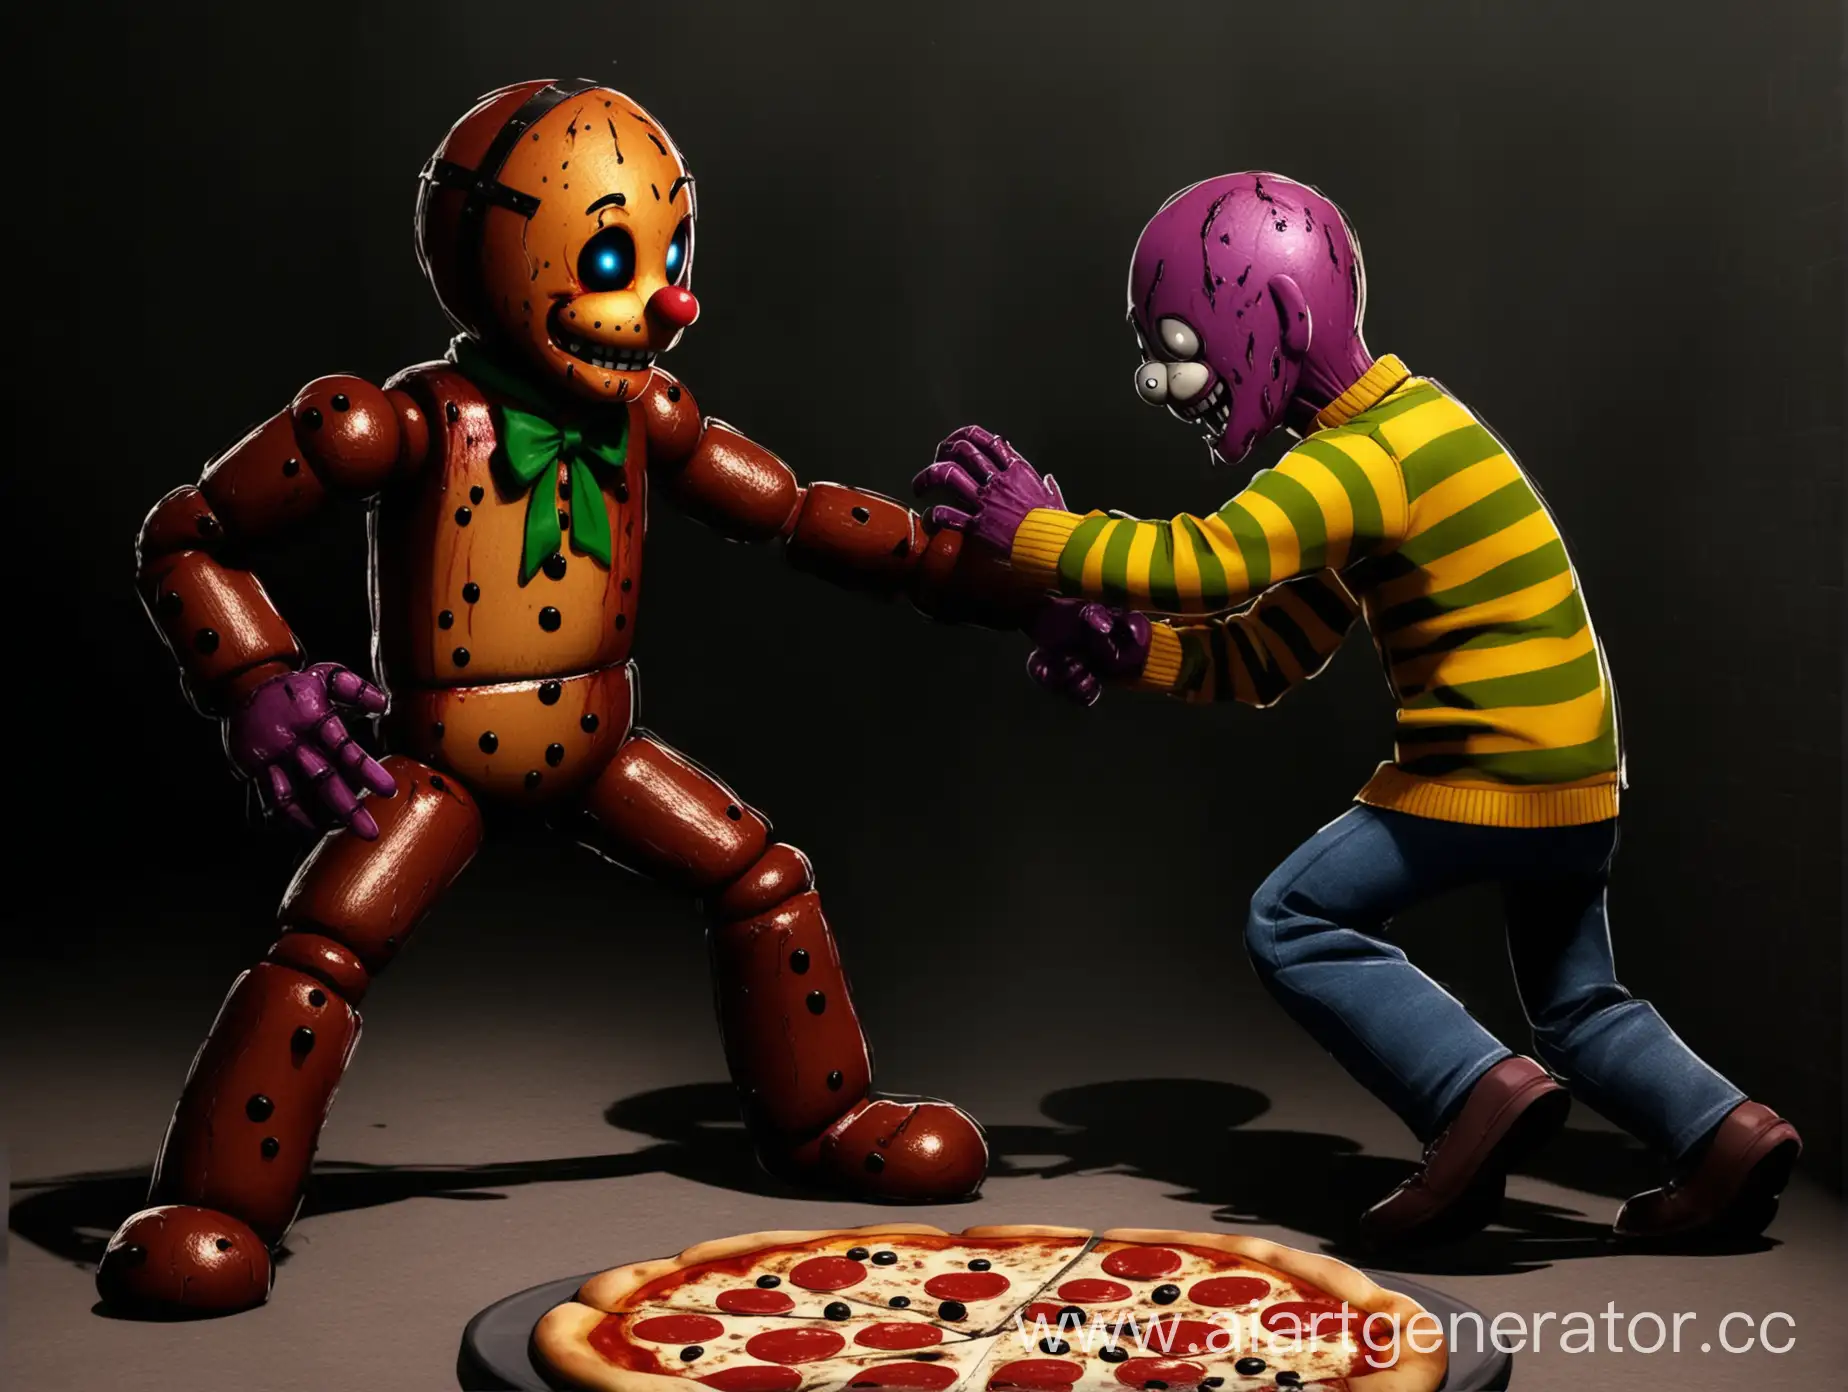 William afton fights with freddy from Freddy fazber's pizzeria